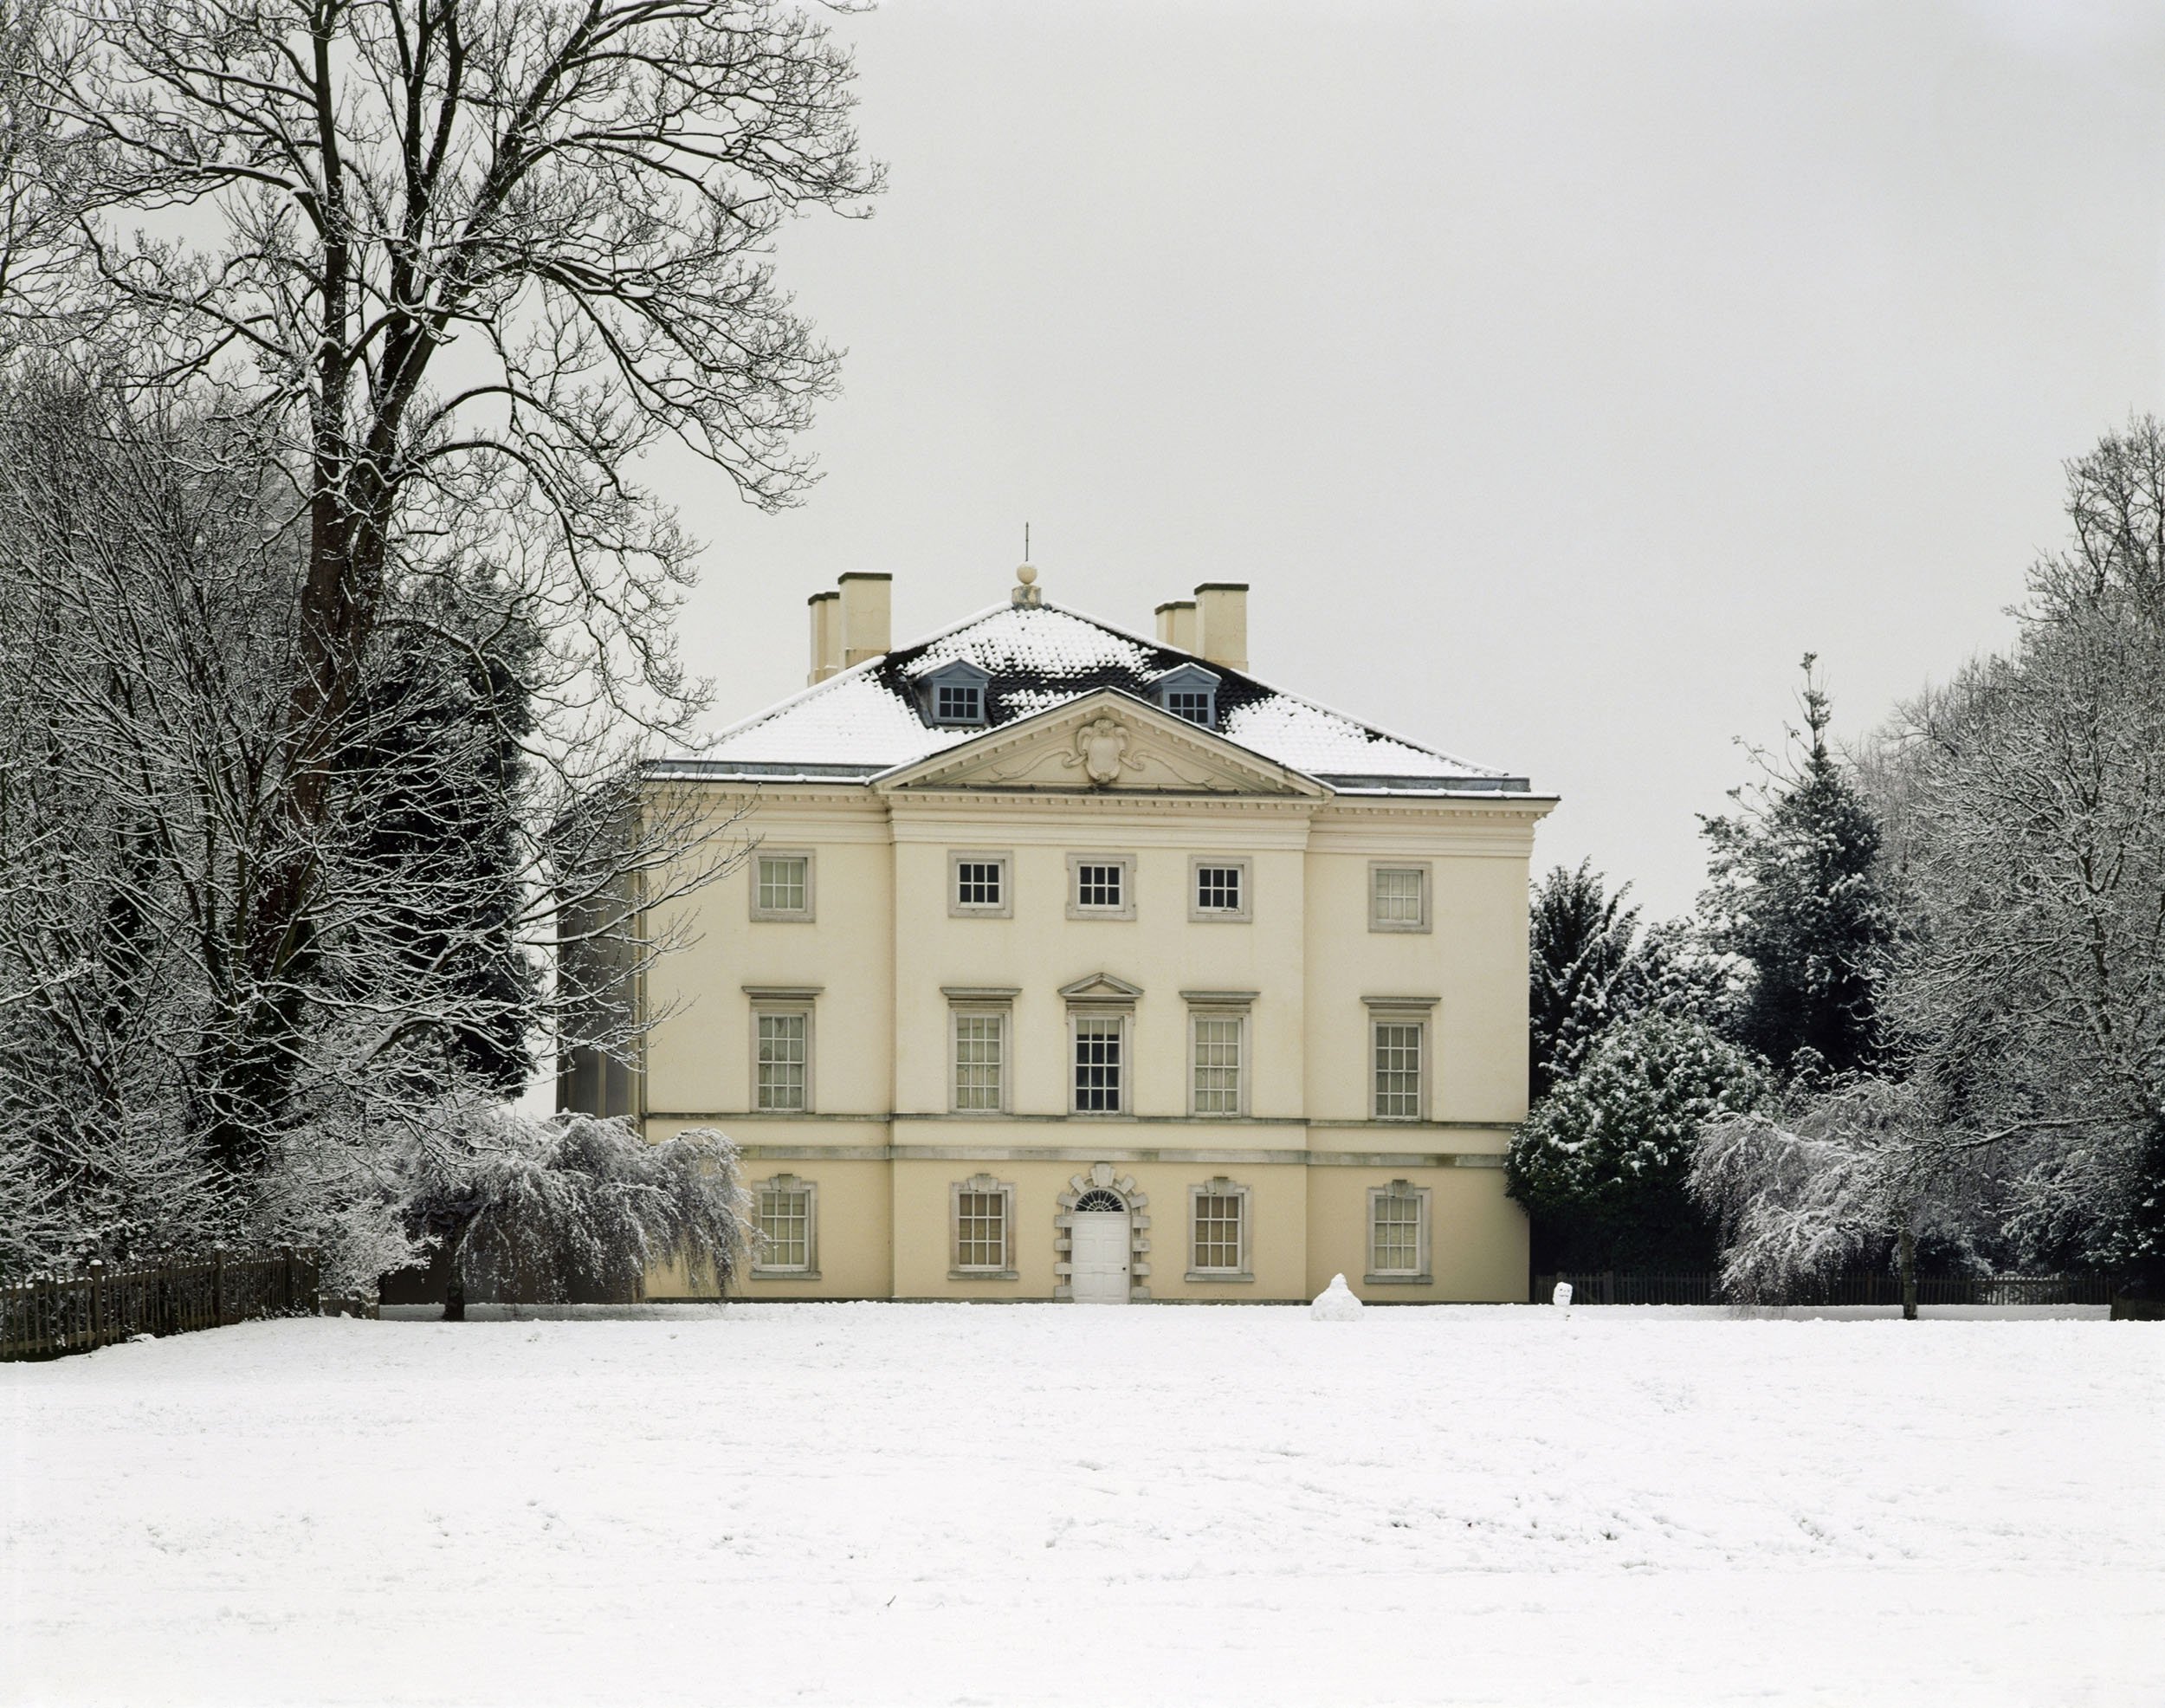 Image of the exterior of Marble Hill House, Richmond, in the snow.